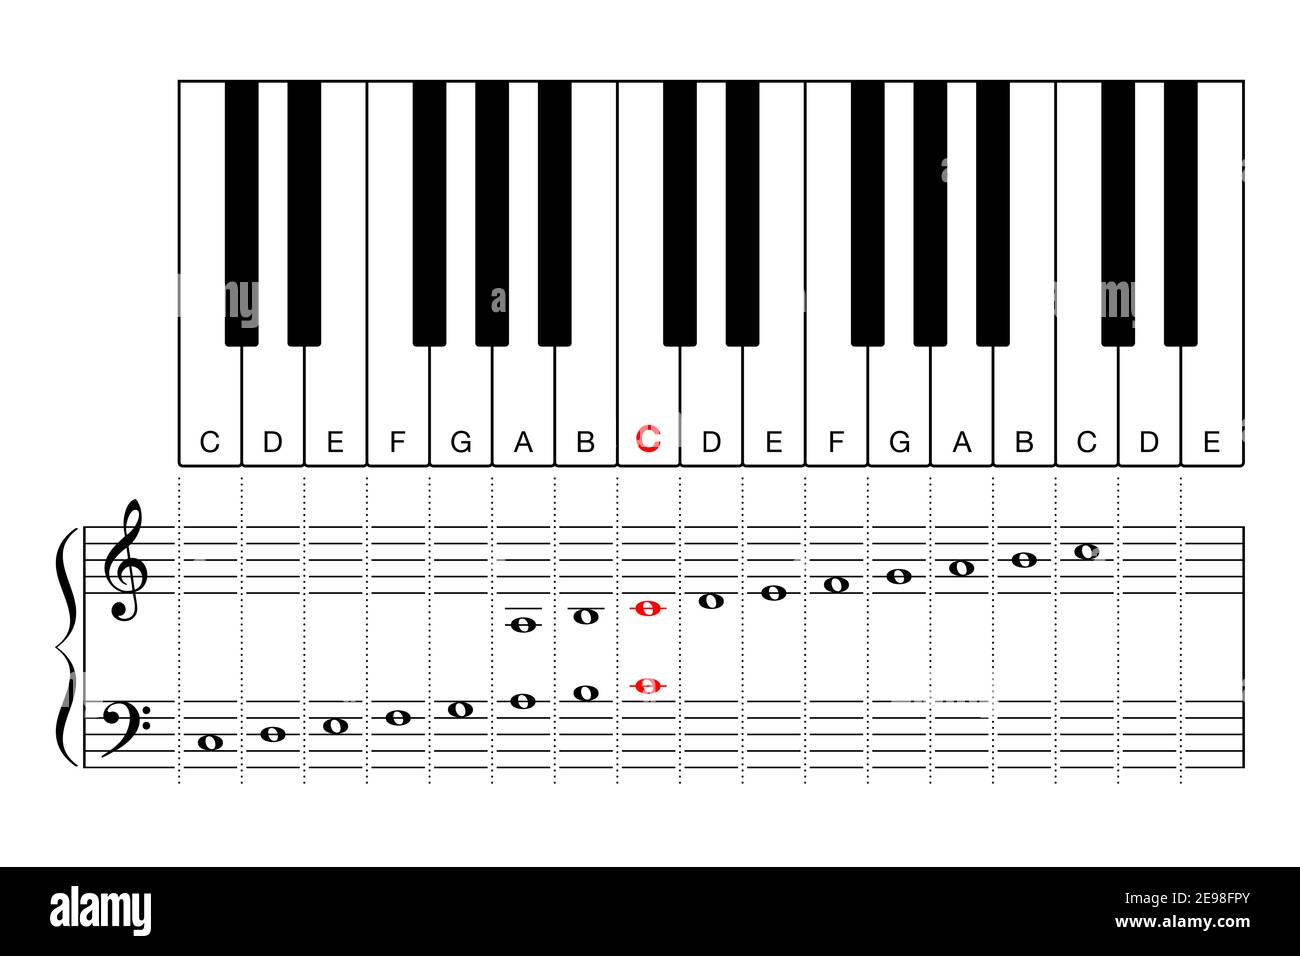 Middle C on a piano keyboard, learning aid and cheat sheet. Diagram of two  octave sections, for treble clef and bass clef, on keyboard and grand staff  Stock Photo - Alamy